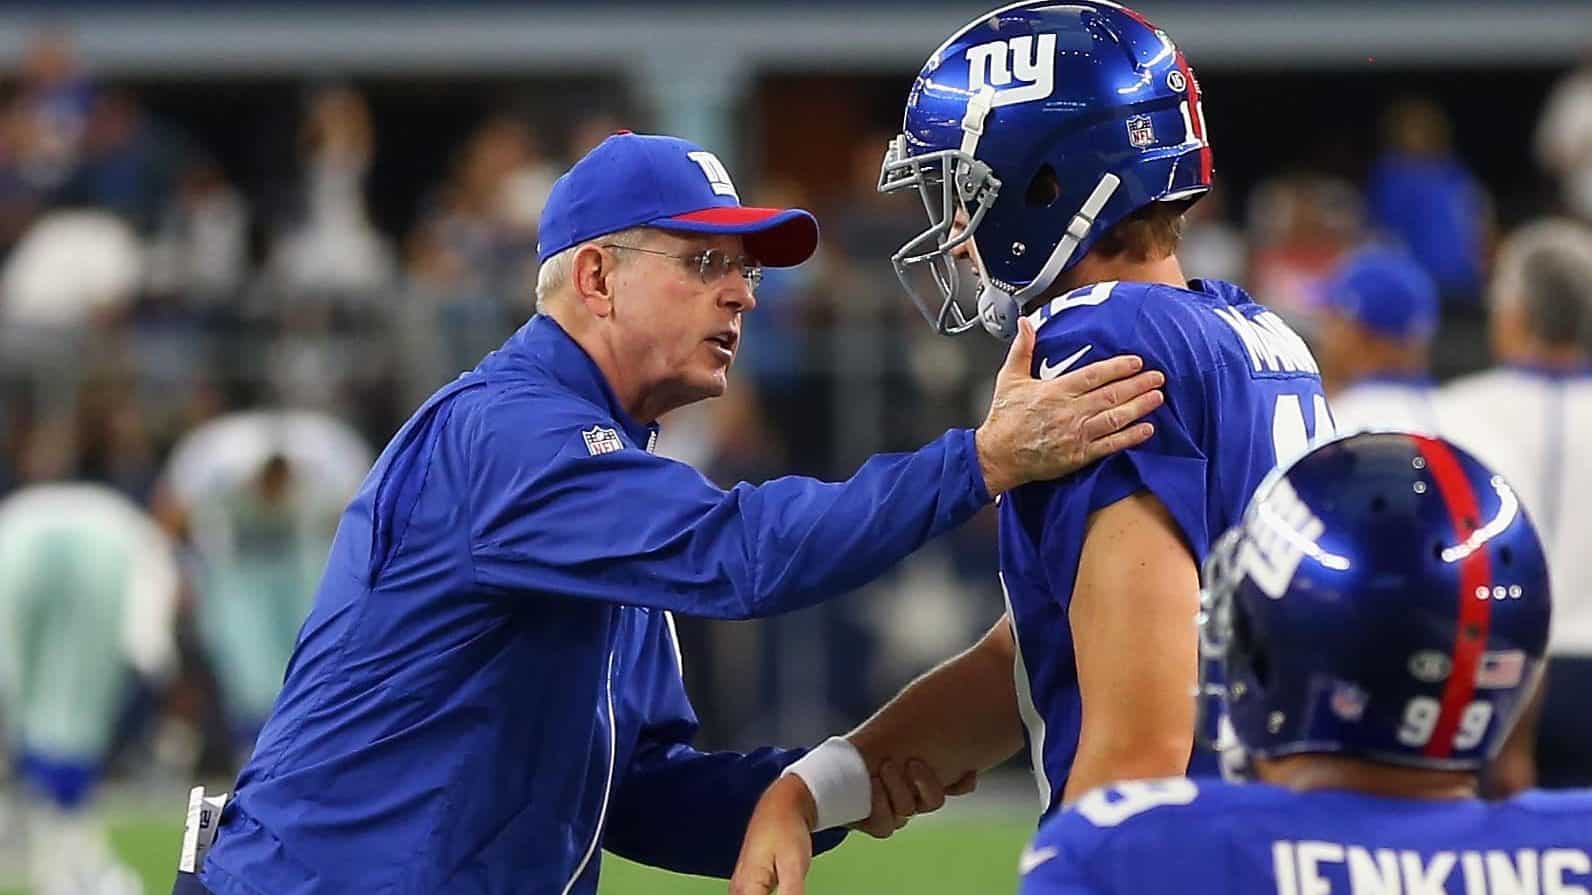 ARLINGTON, TX - SEPTEMBER 13: (L-R) Head coach Tom Coughlin of the New York Giants greets Eli Manning #10 before a game against the Dallas Cowboys at AT&T Stadium on September 13, 2015 in Arlington, Texas.